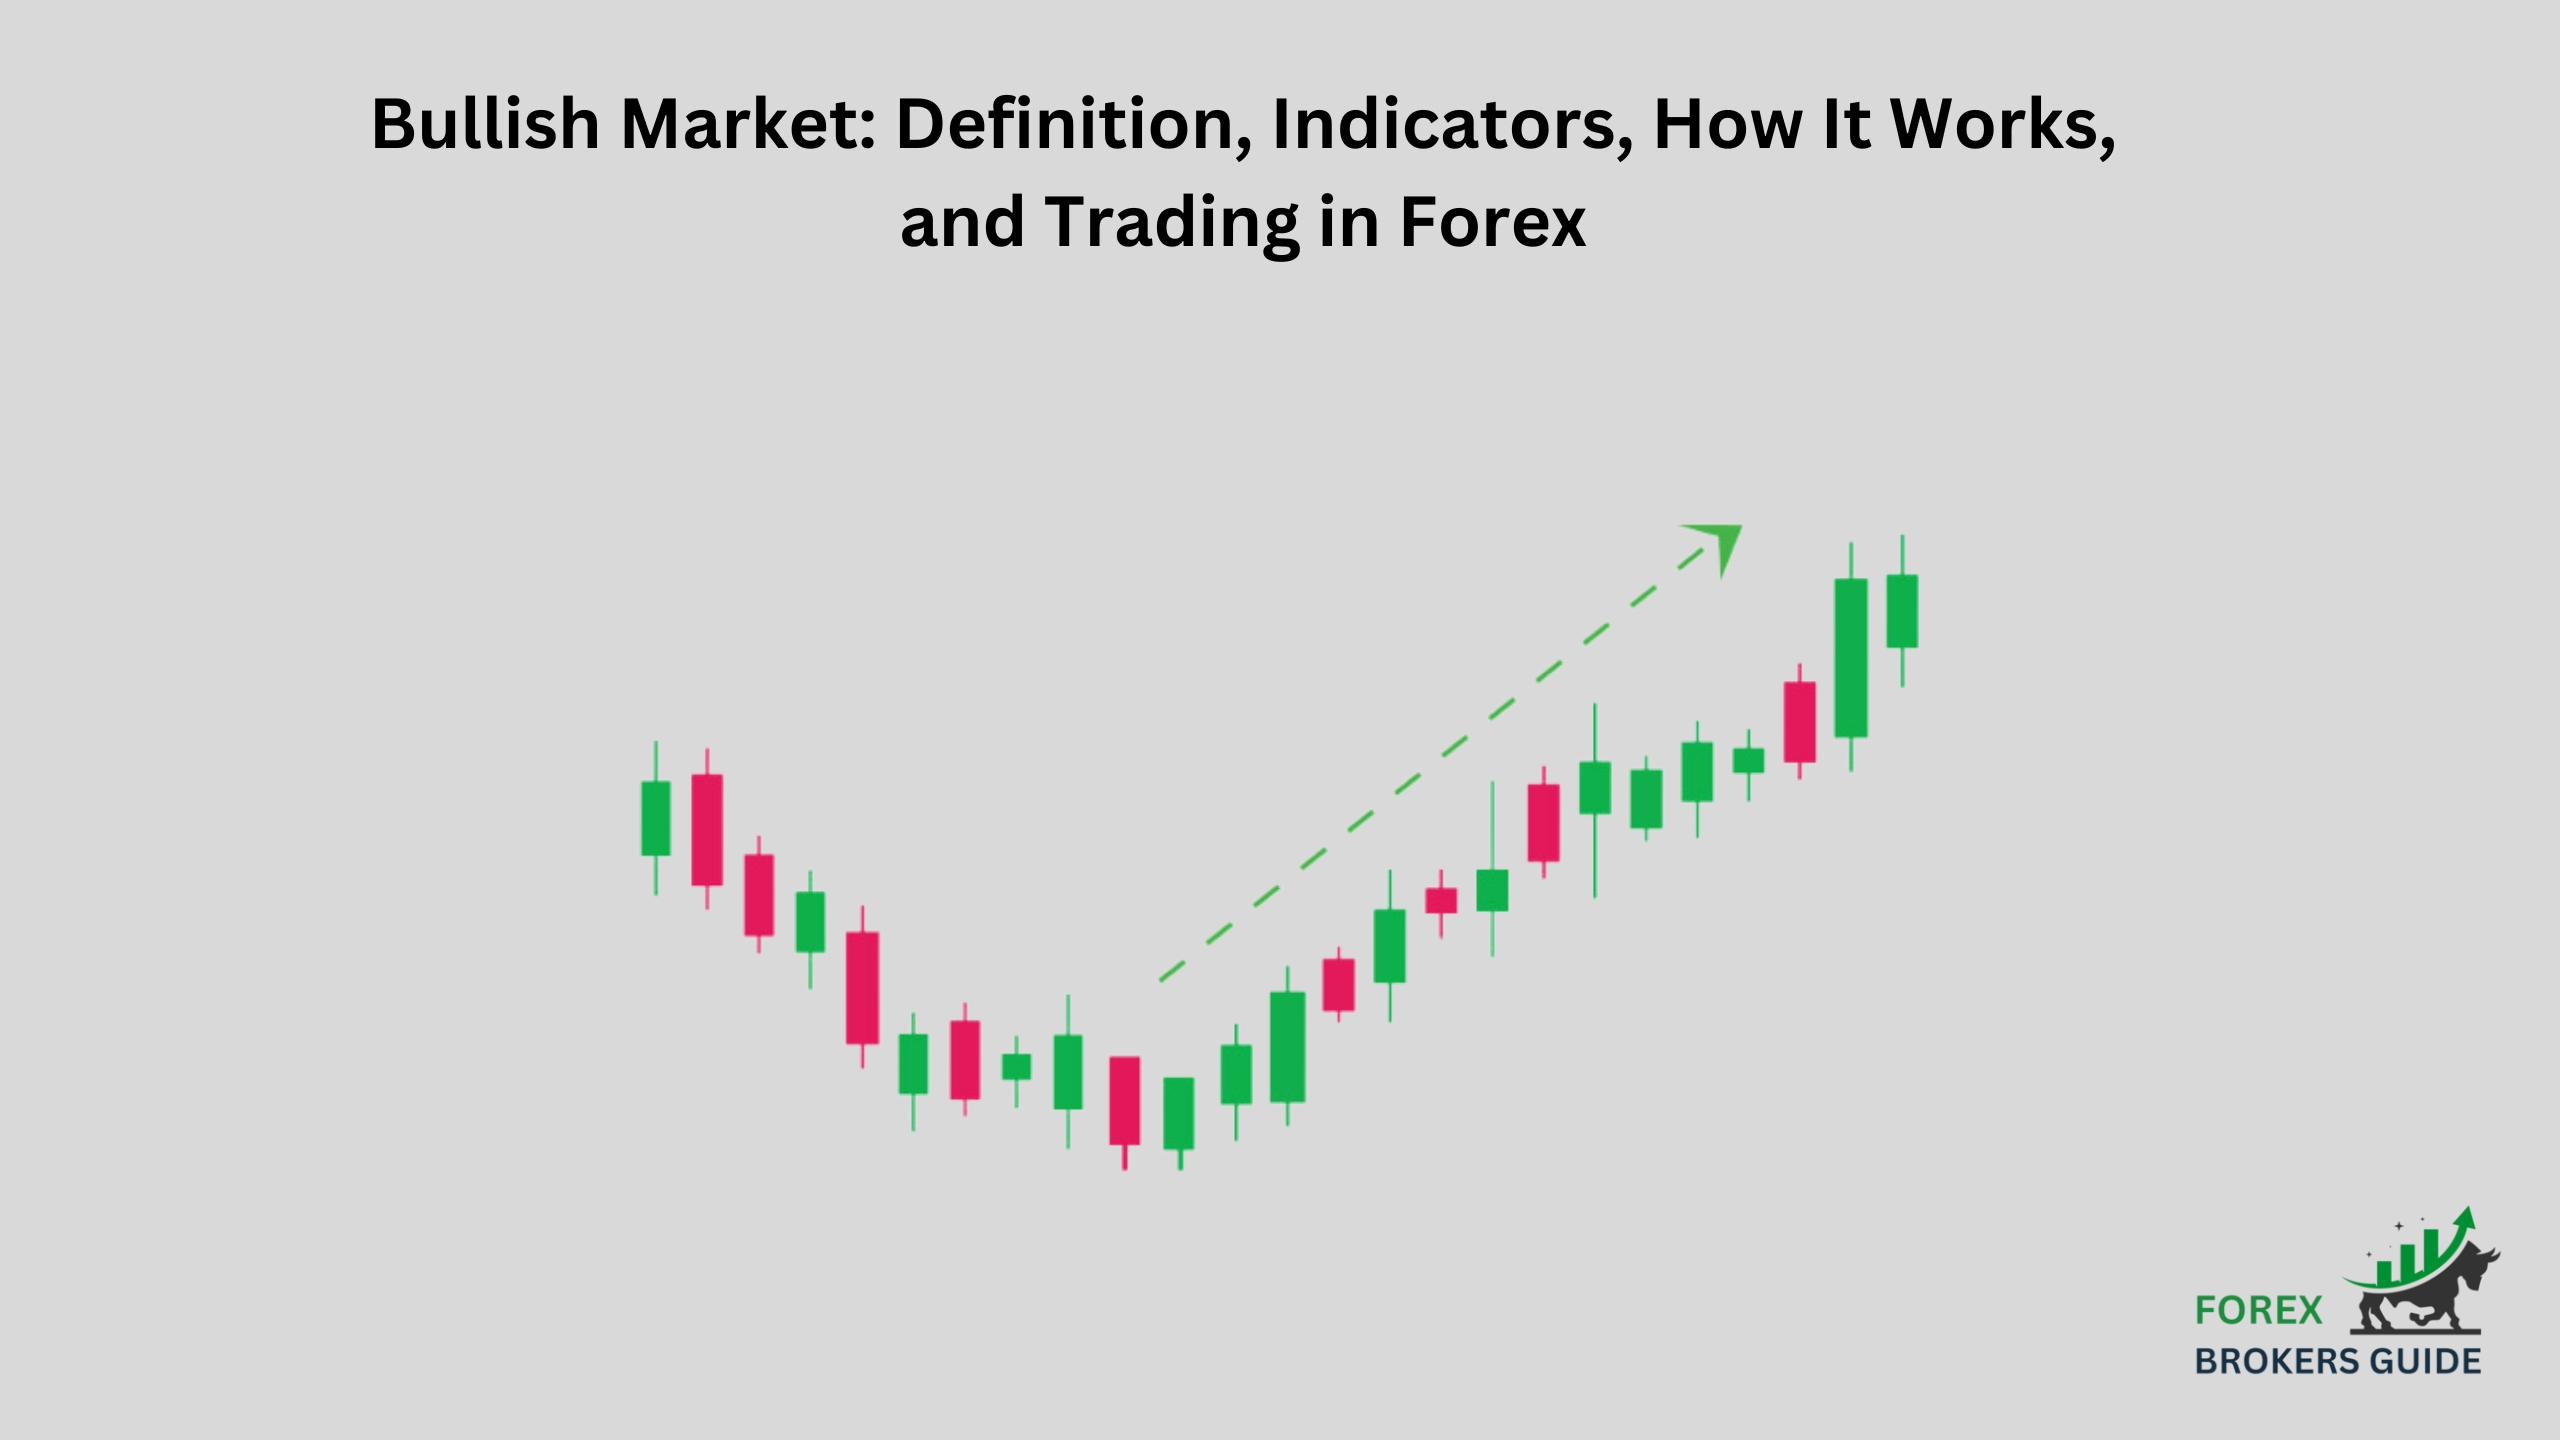 Bullish Market Definition, Indicators, How It Works, and Trading in Forex